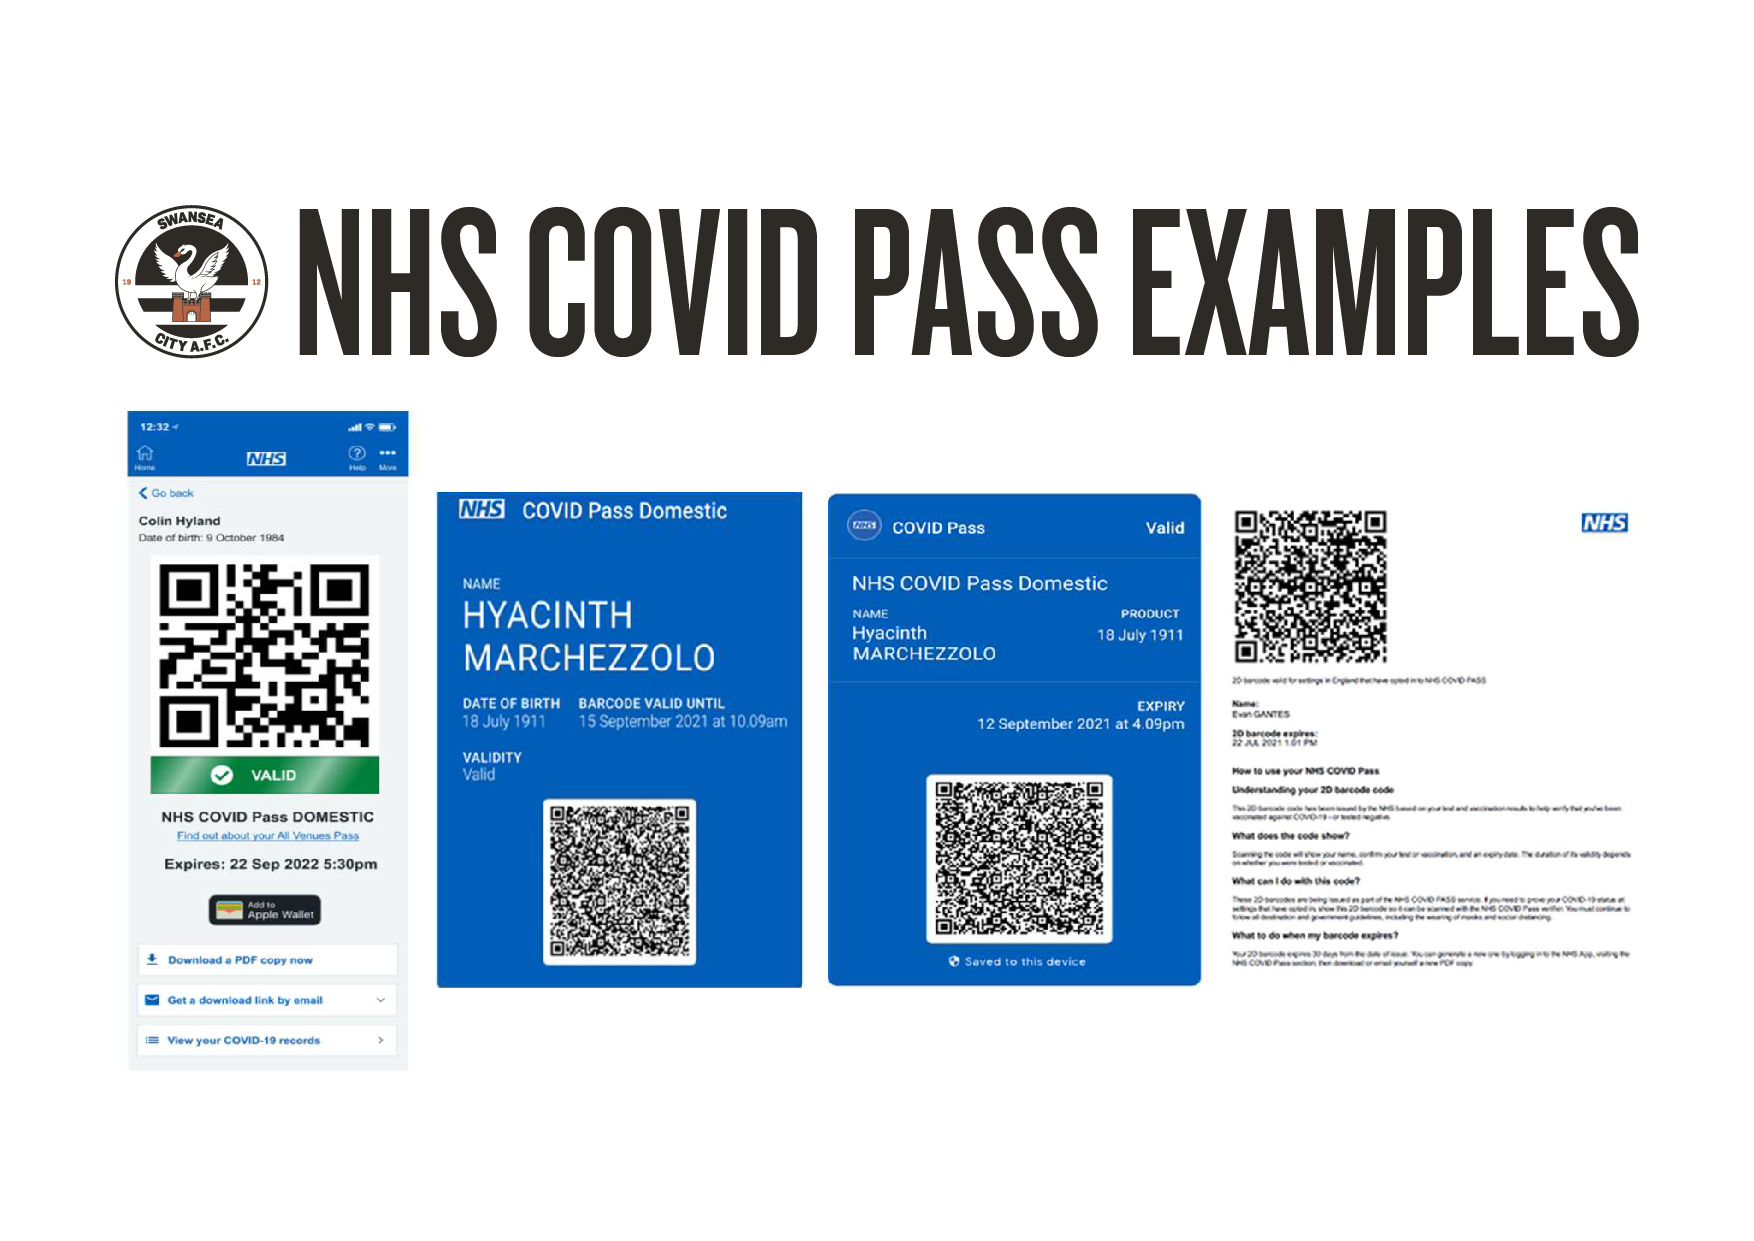 COVID PASS EXAMPLES